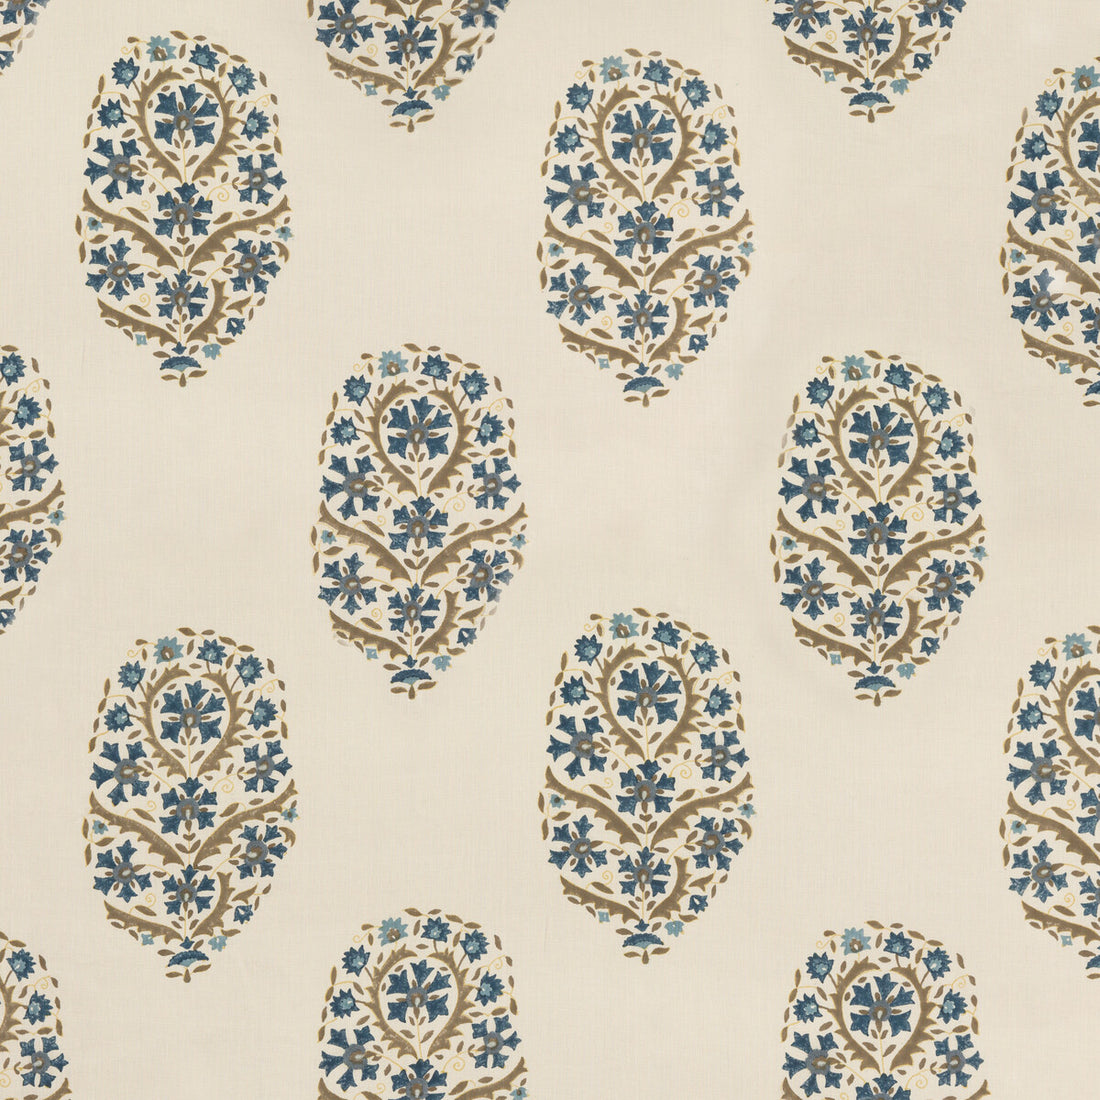 Aydon fabric in indigo color - pattern BP10795.2.0 - by G P &amp; J Baker in the Artisan II collection